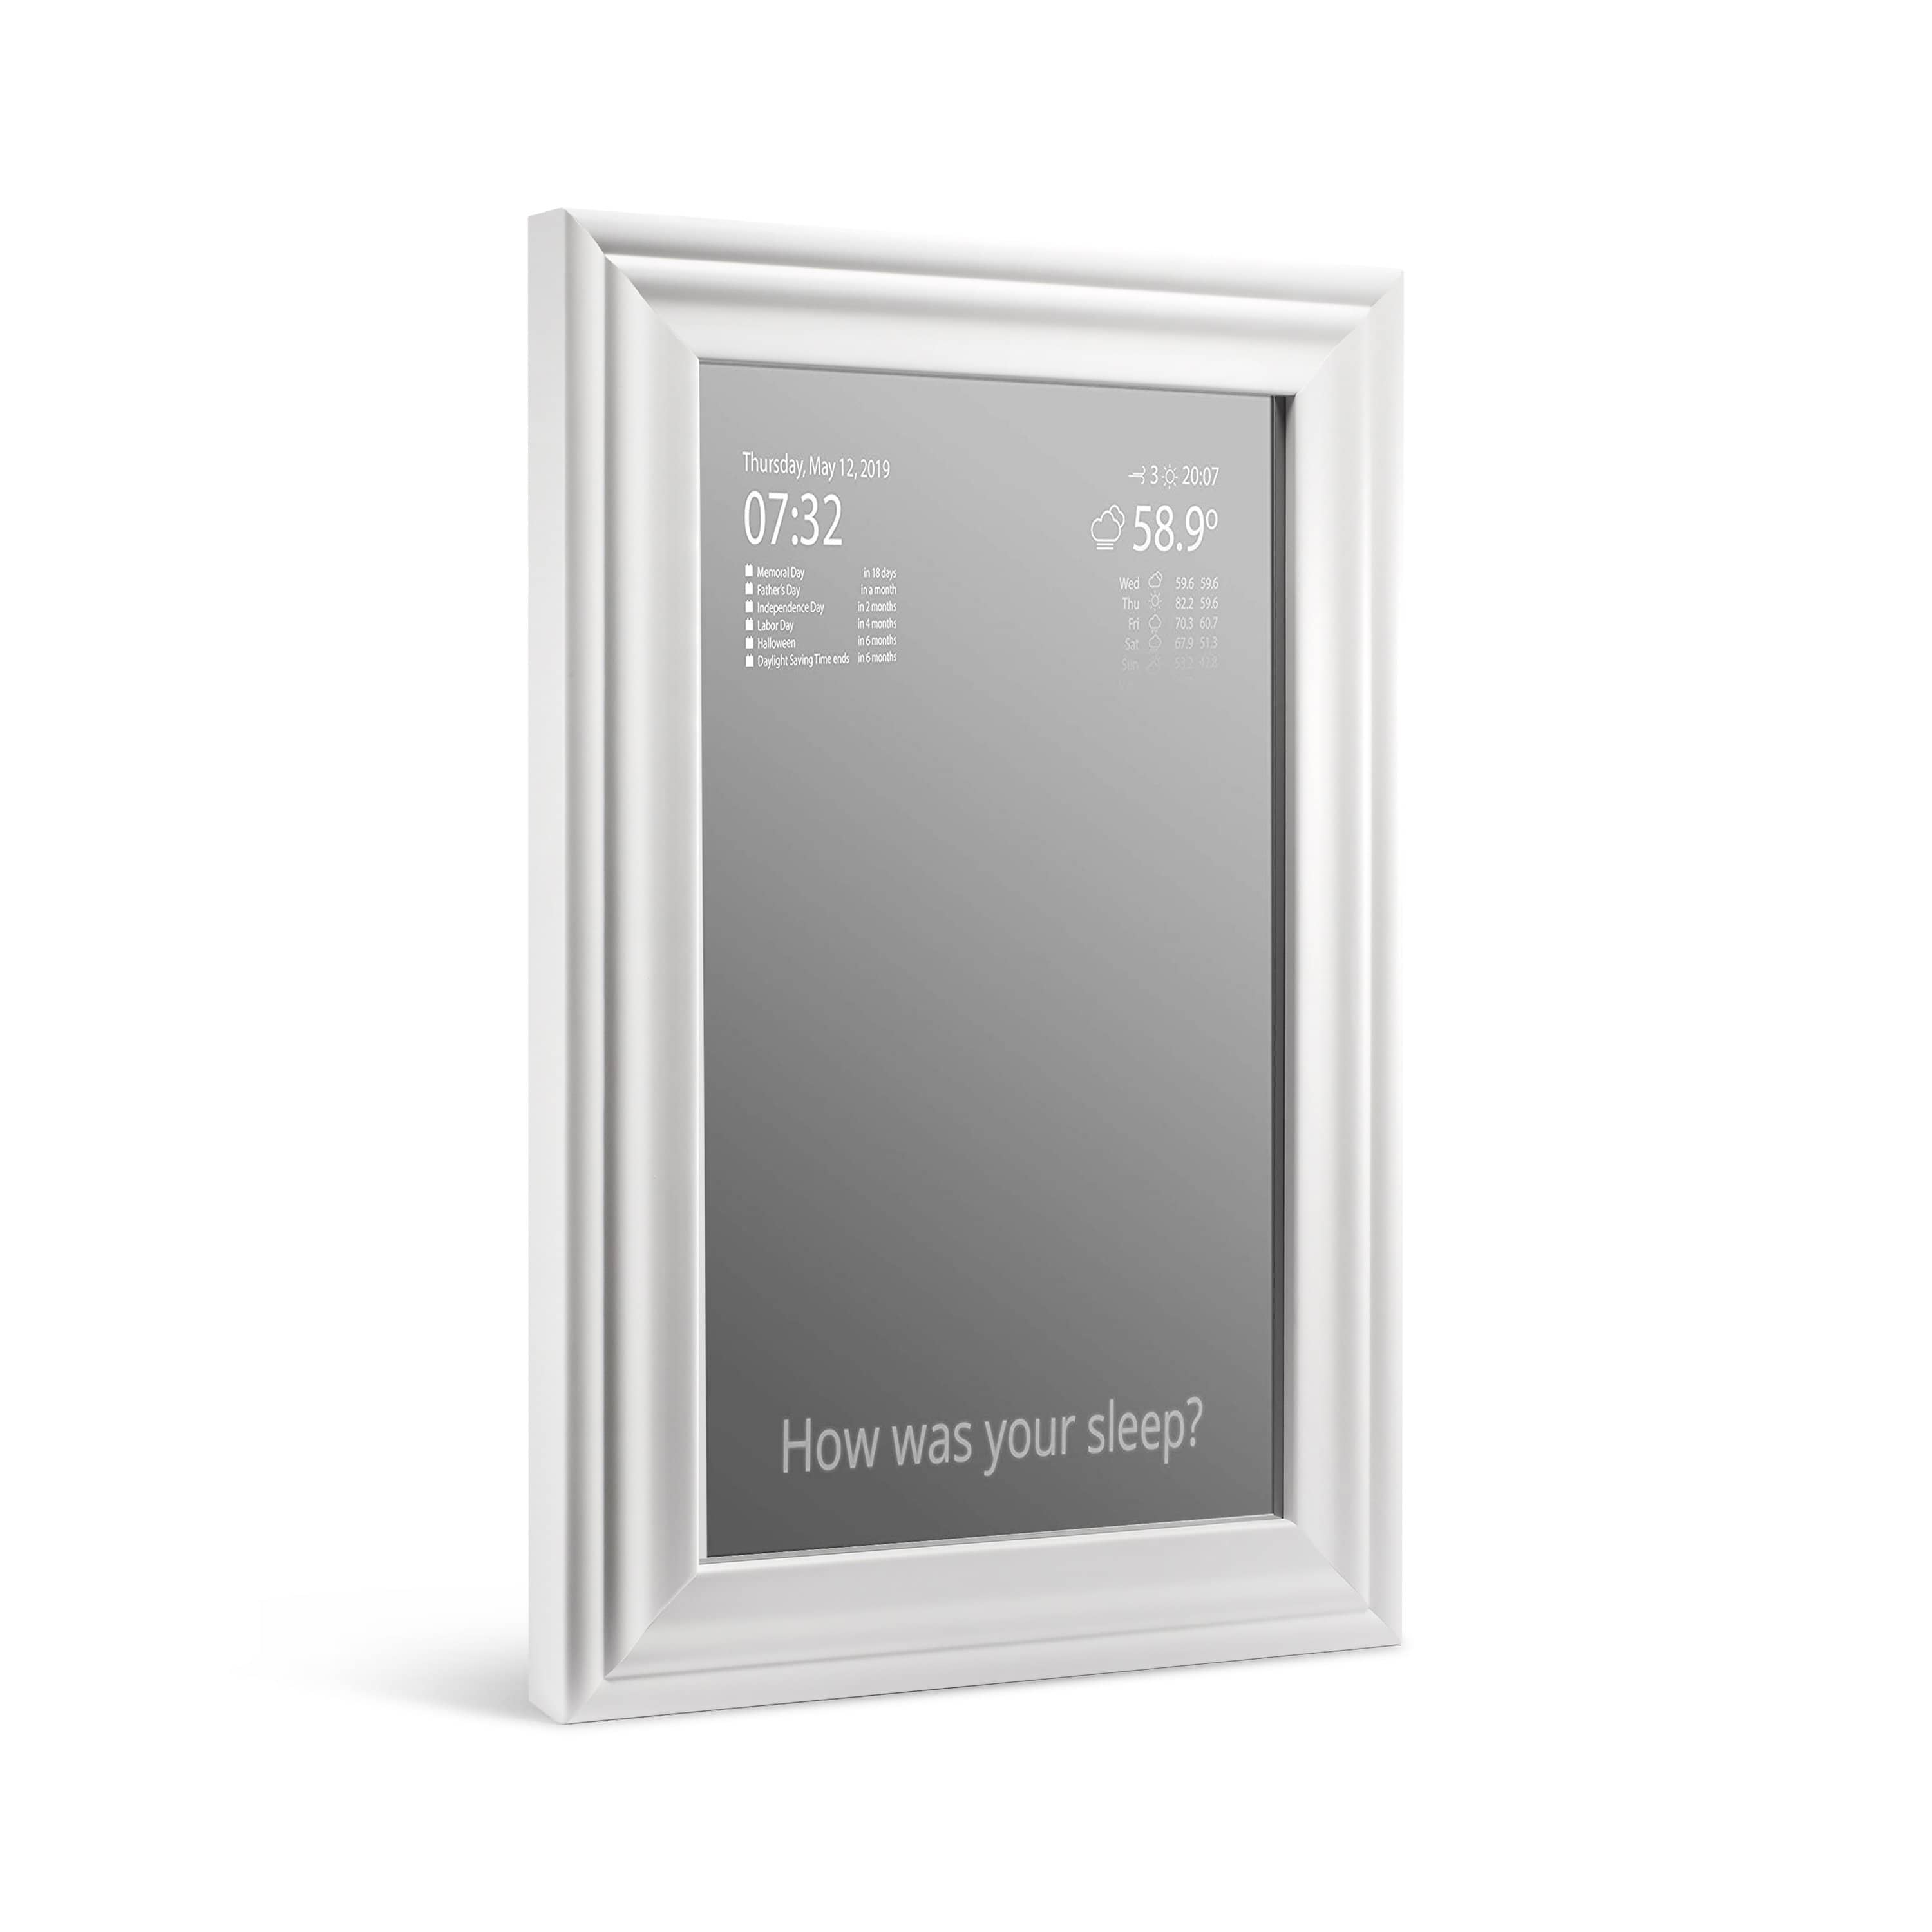  Vilros Magic Mirror V4-2 Way Mirror with Internal LCD Screen  for Smart Mirrors Projects-Great for Raspberry Pi (Black) : Electronics